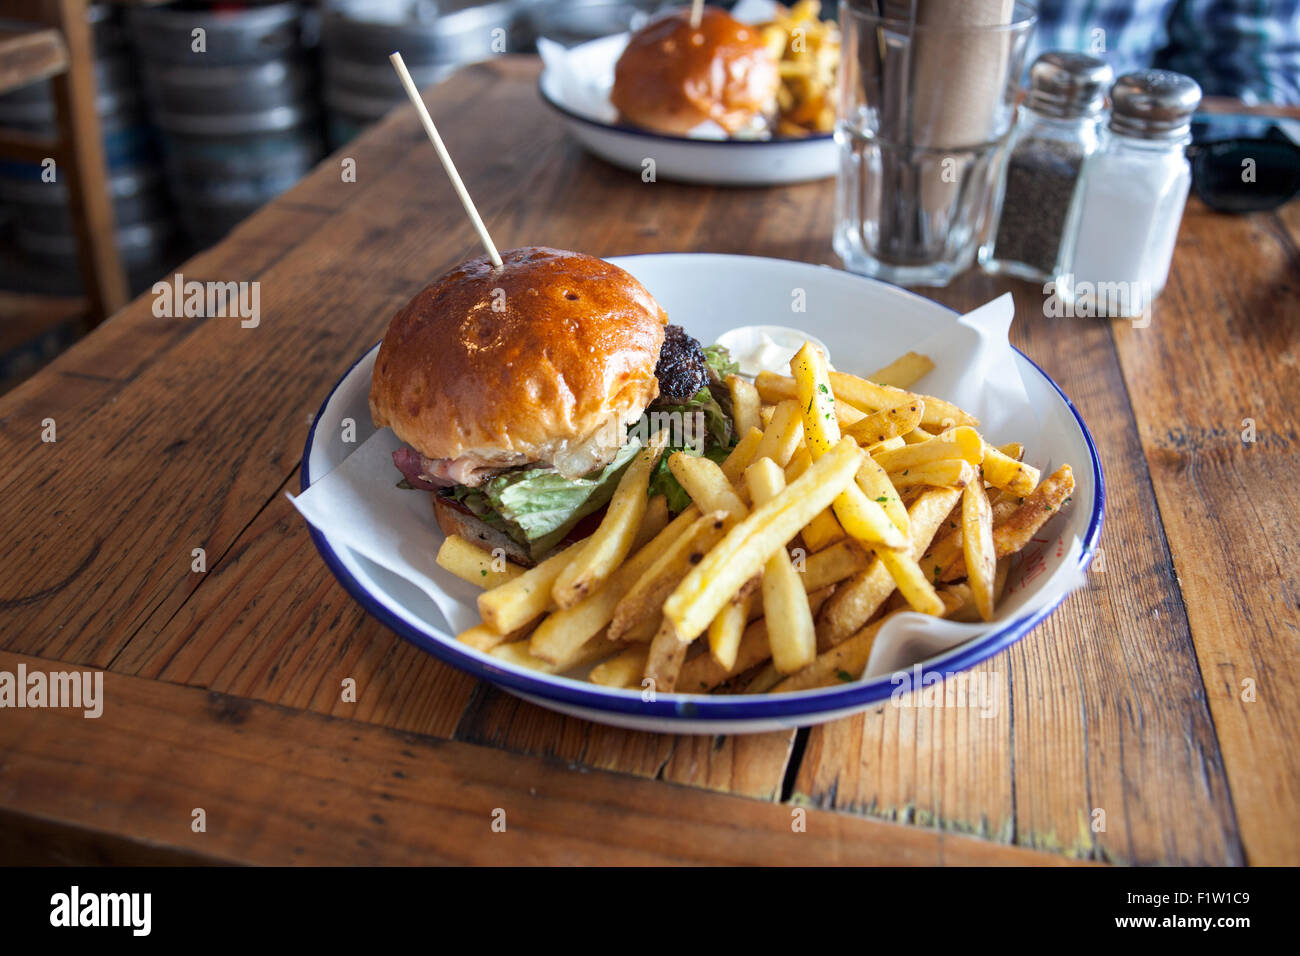 Sussex Longhorn burger and chips at Lucky Beach, Brighton, UK Stock Photo